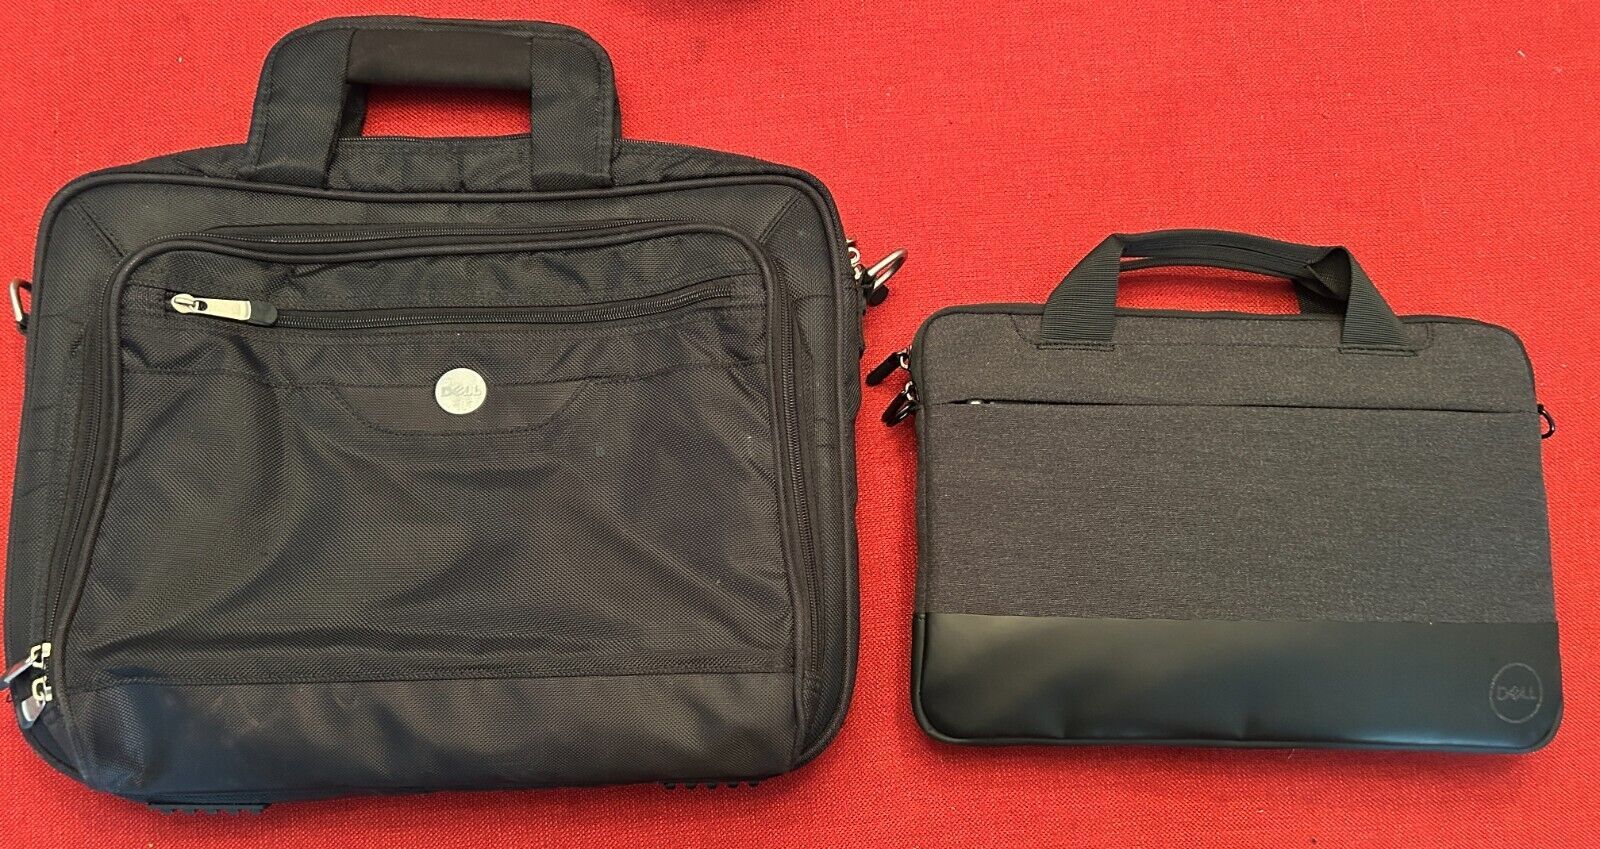 Primary image for 2 Genuine Dell Laptop Bags w/ Straps | 15" wide x 12" high & 12" wide x 9" high